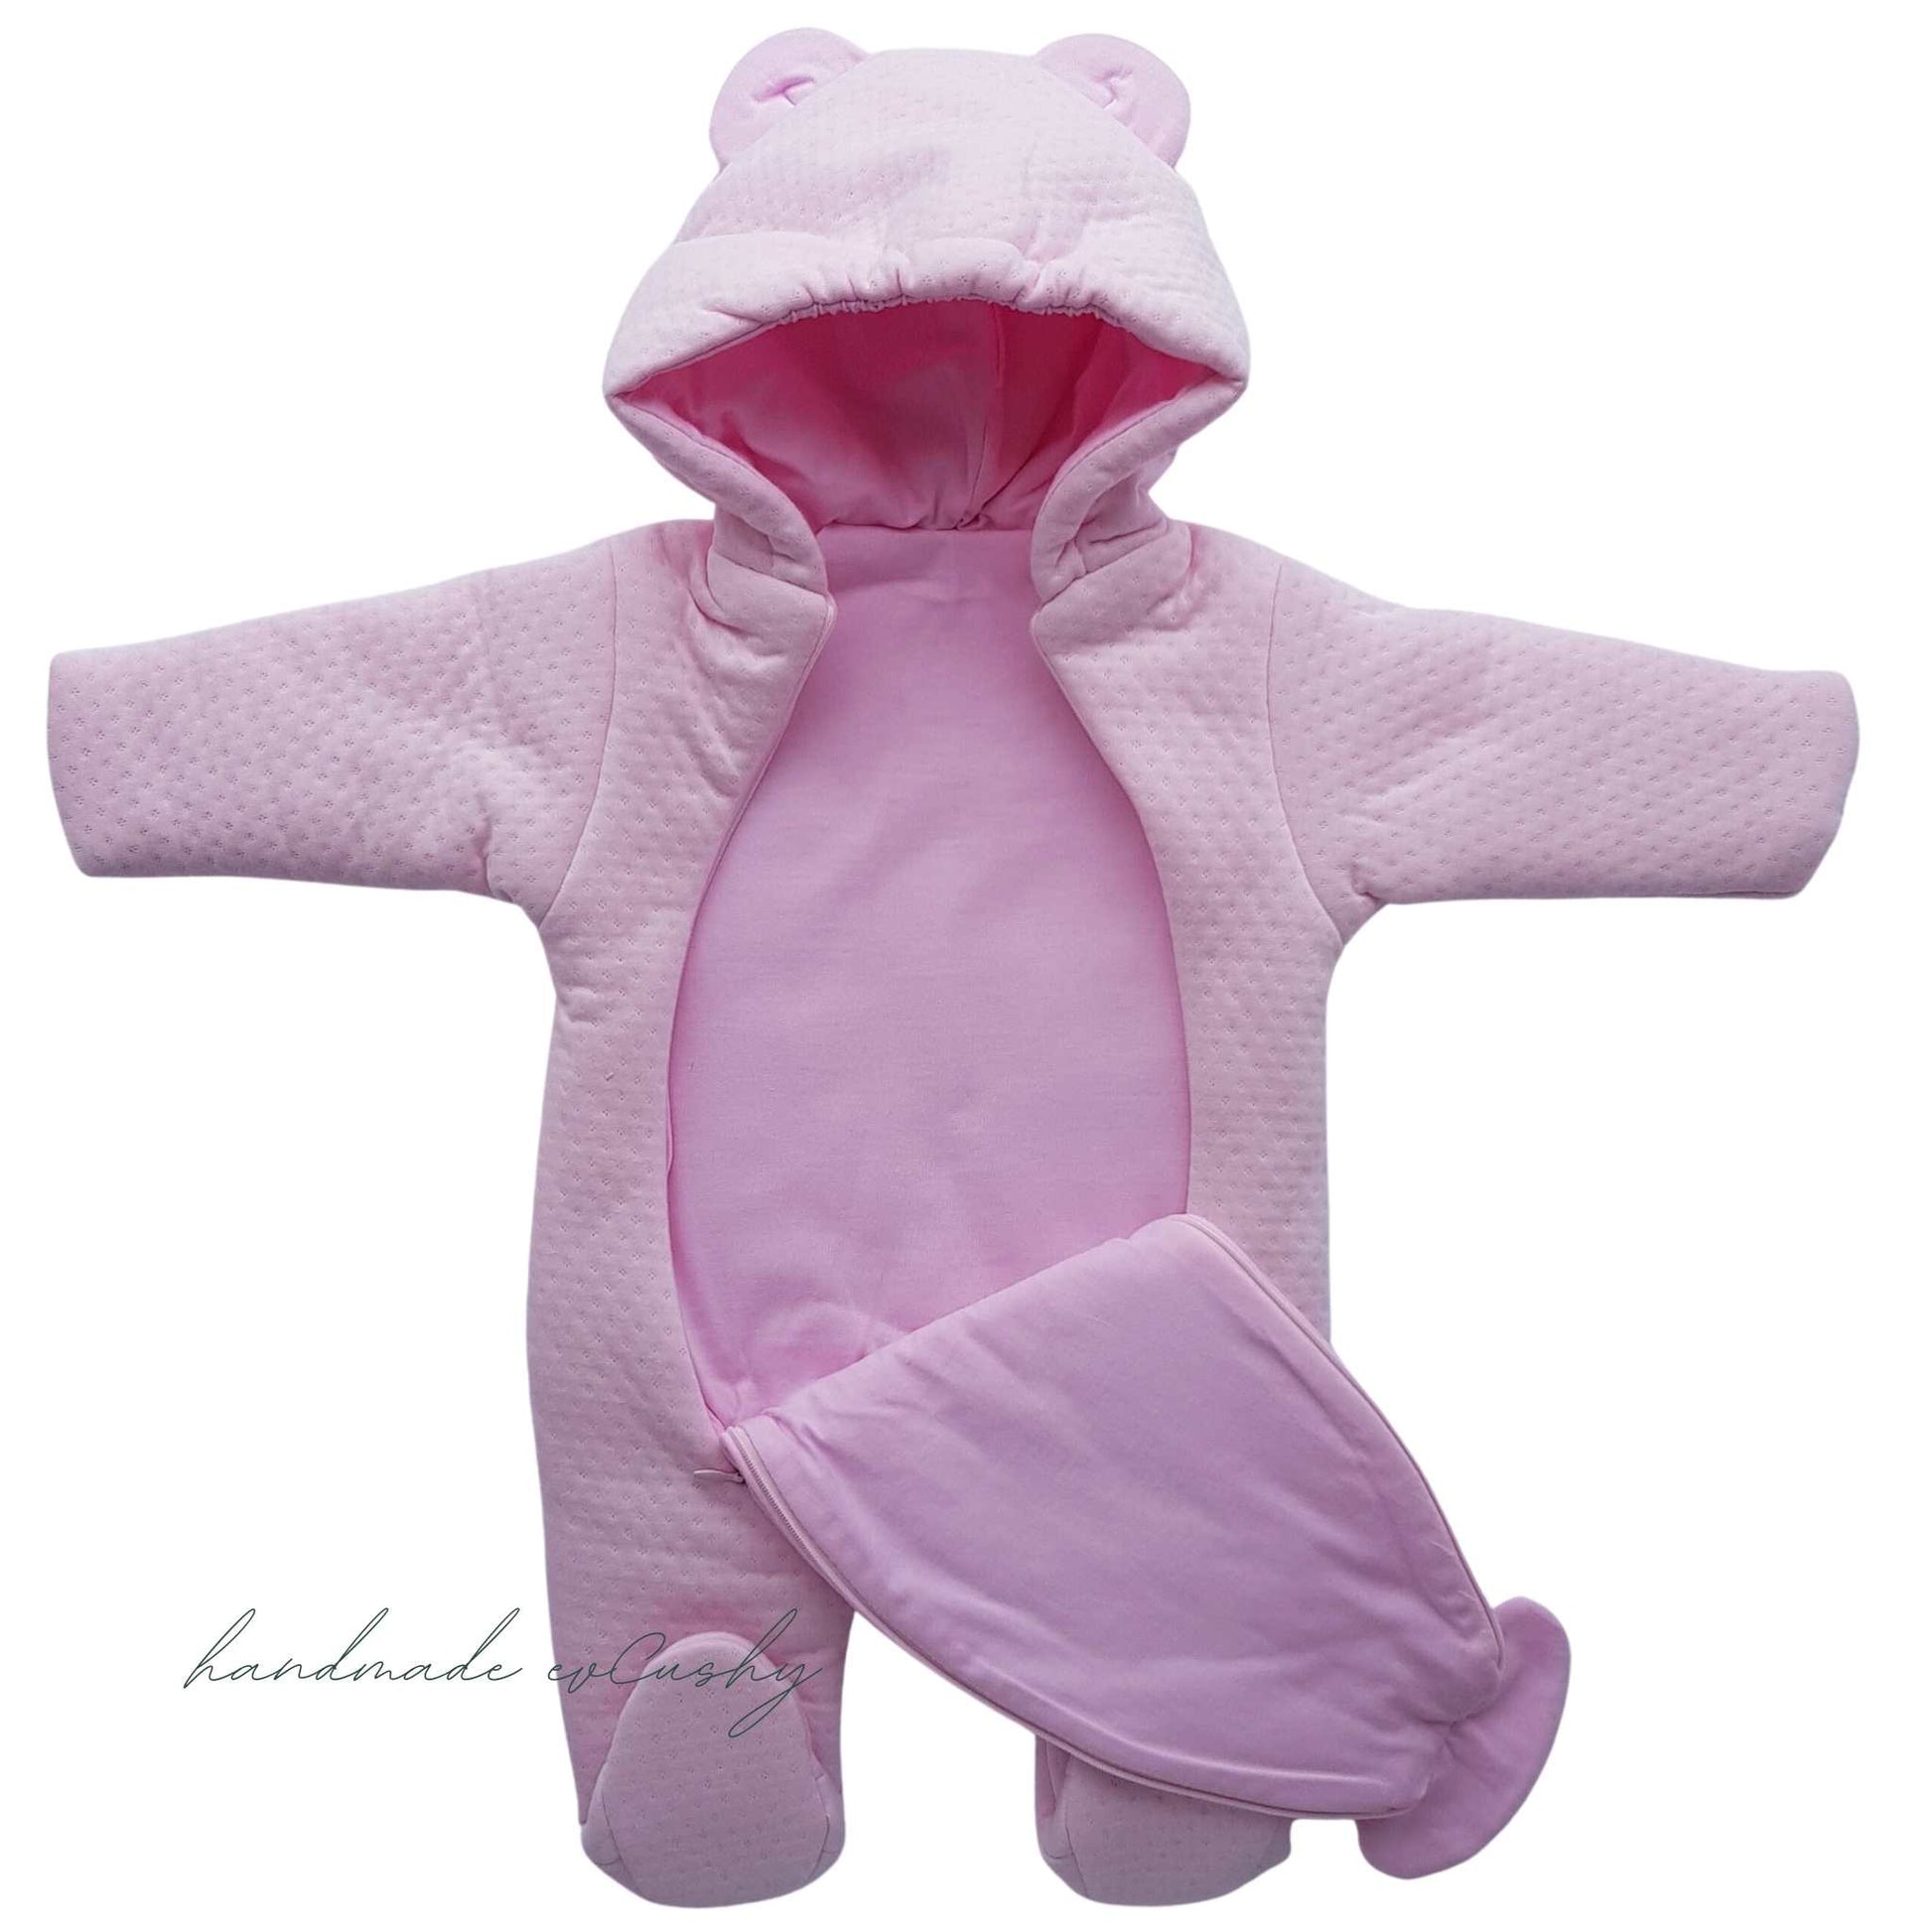 baby winter suit warm pram suit baby girl pink with hood with 2 zippers